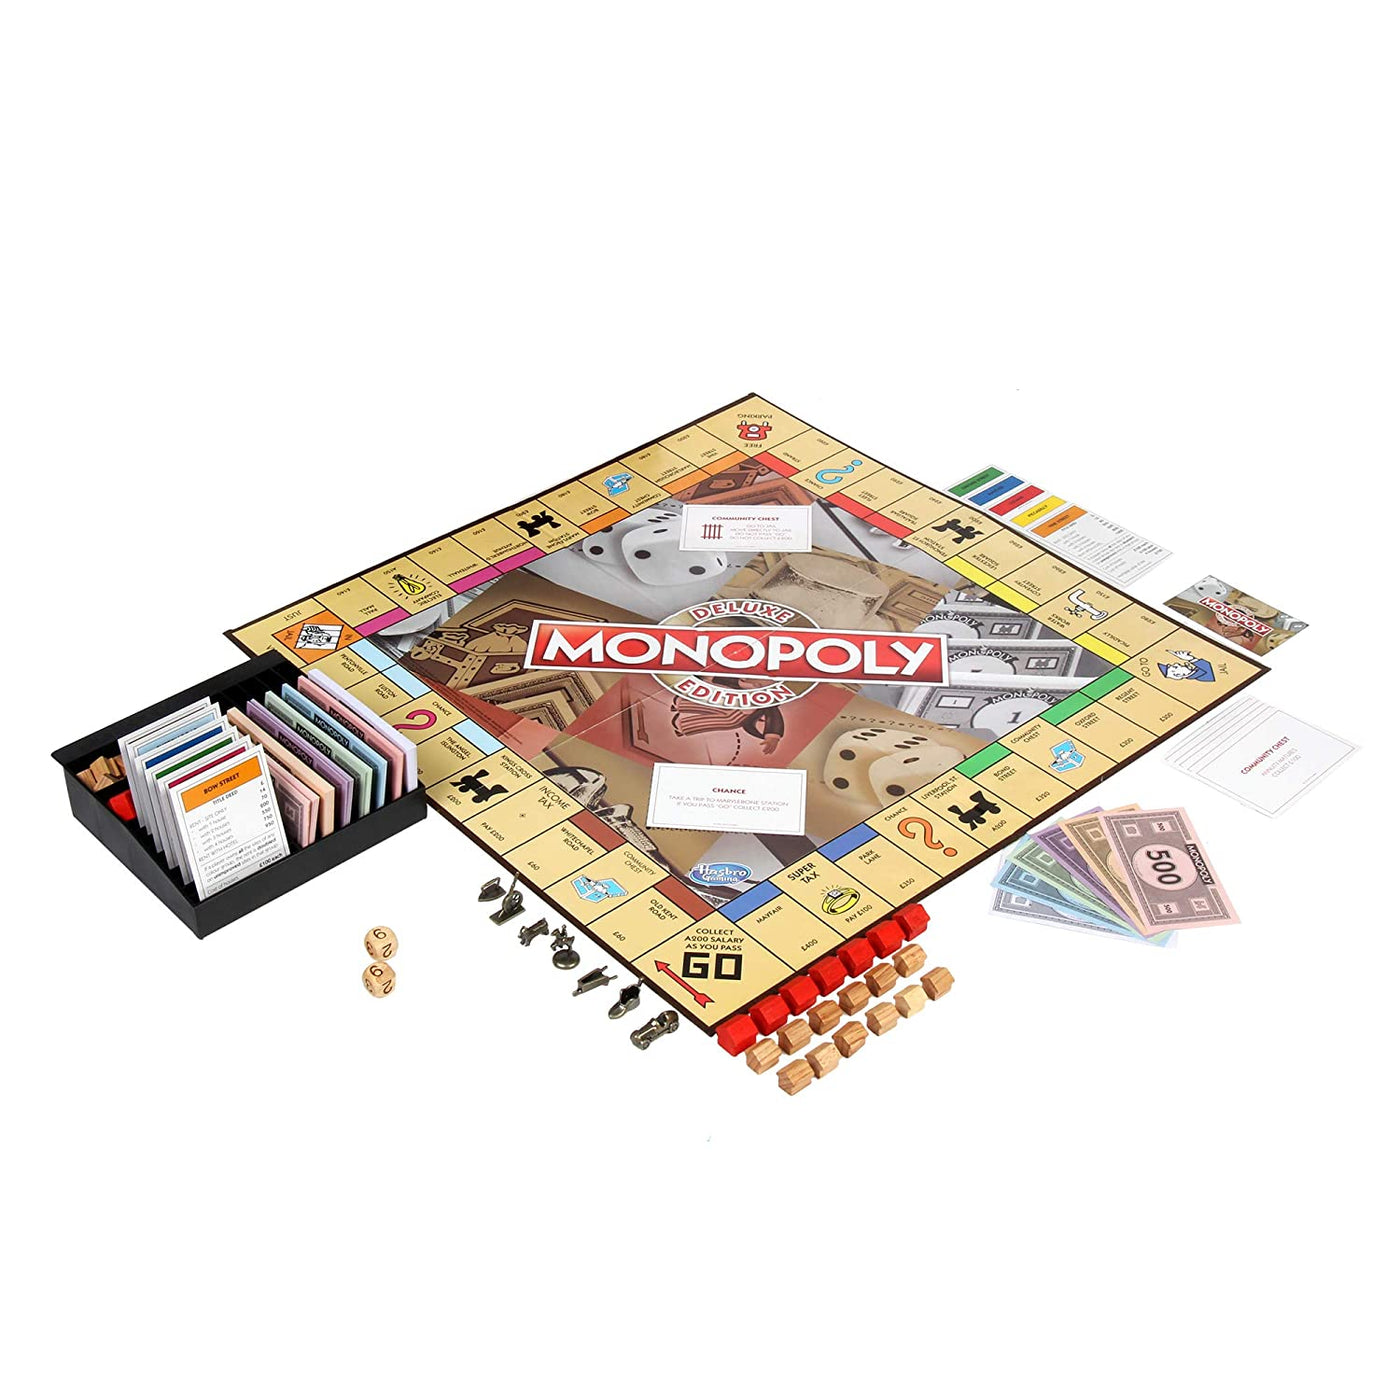 Monopoly: Deluxe Edition - The Property Trading Board Game | Hasbro Gaming